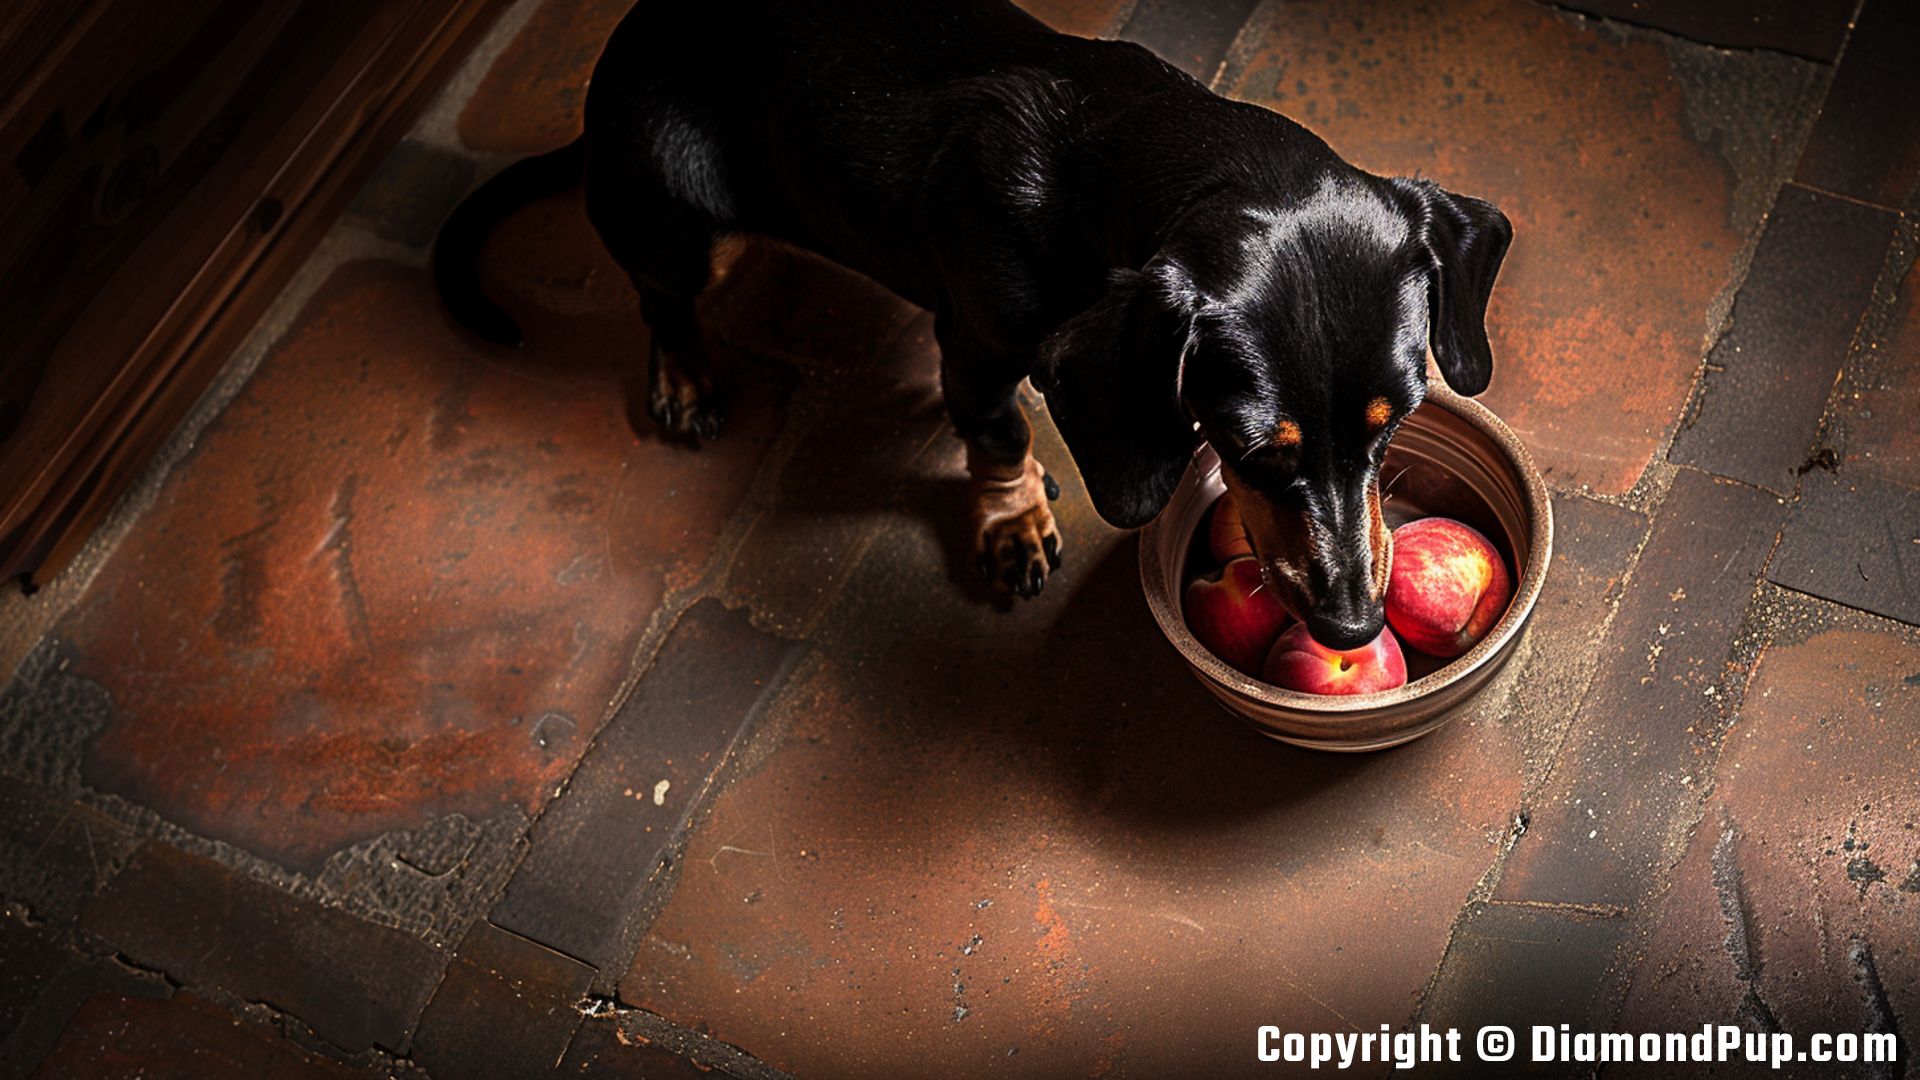 Image of Dachshund Eating Peaches